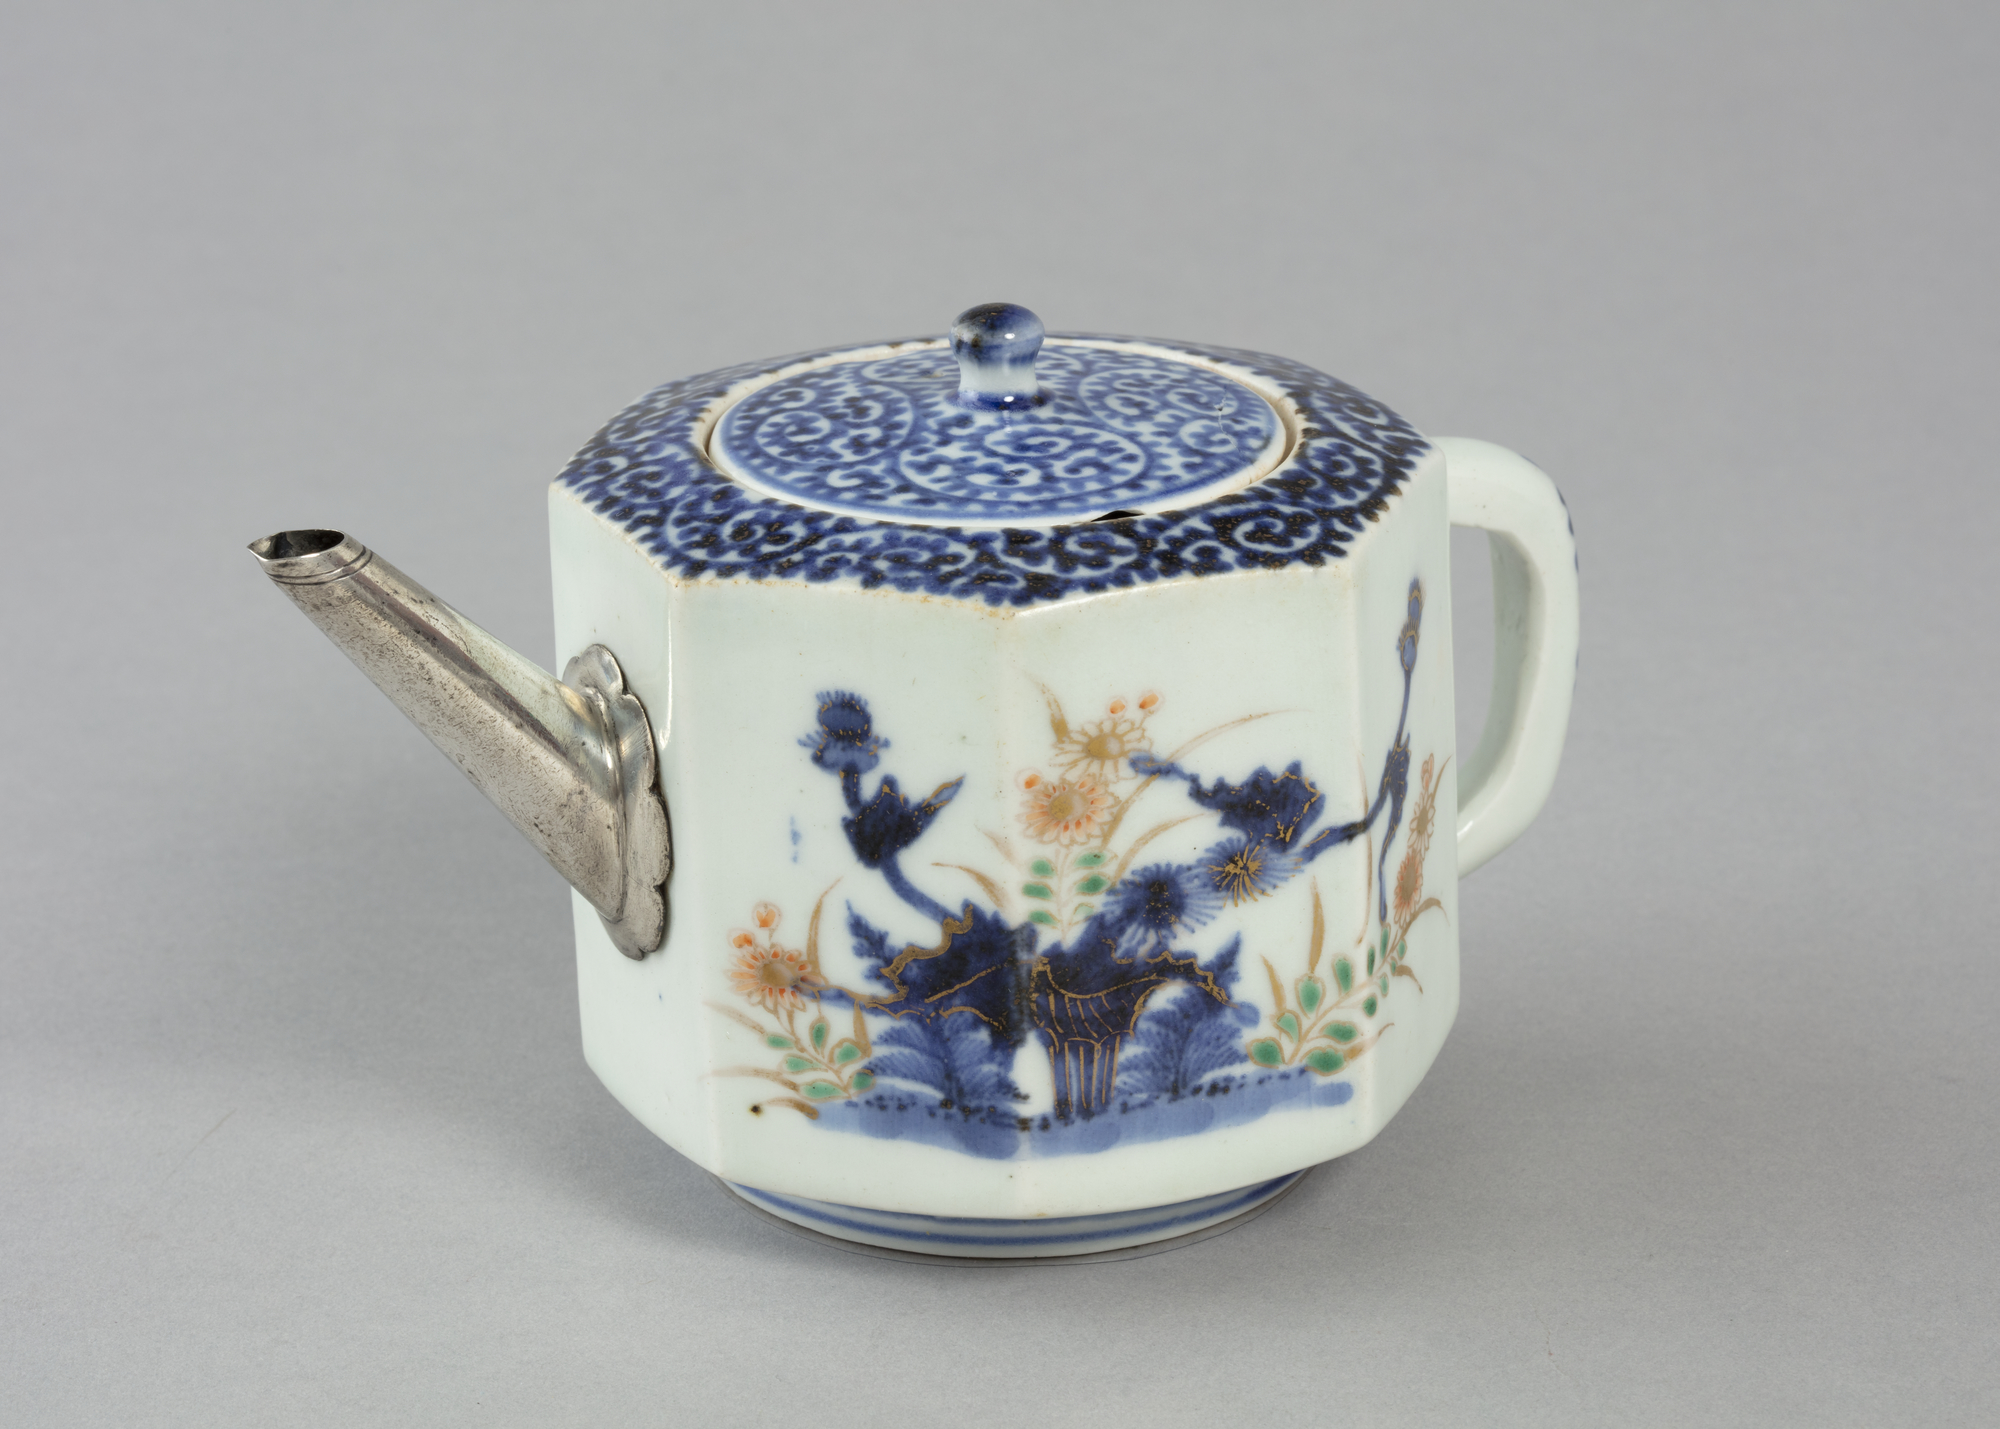 Teapot with octopus scroll pattern on the lid and floral pattern on the base